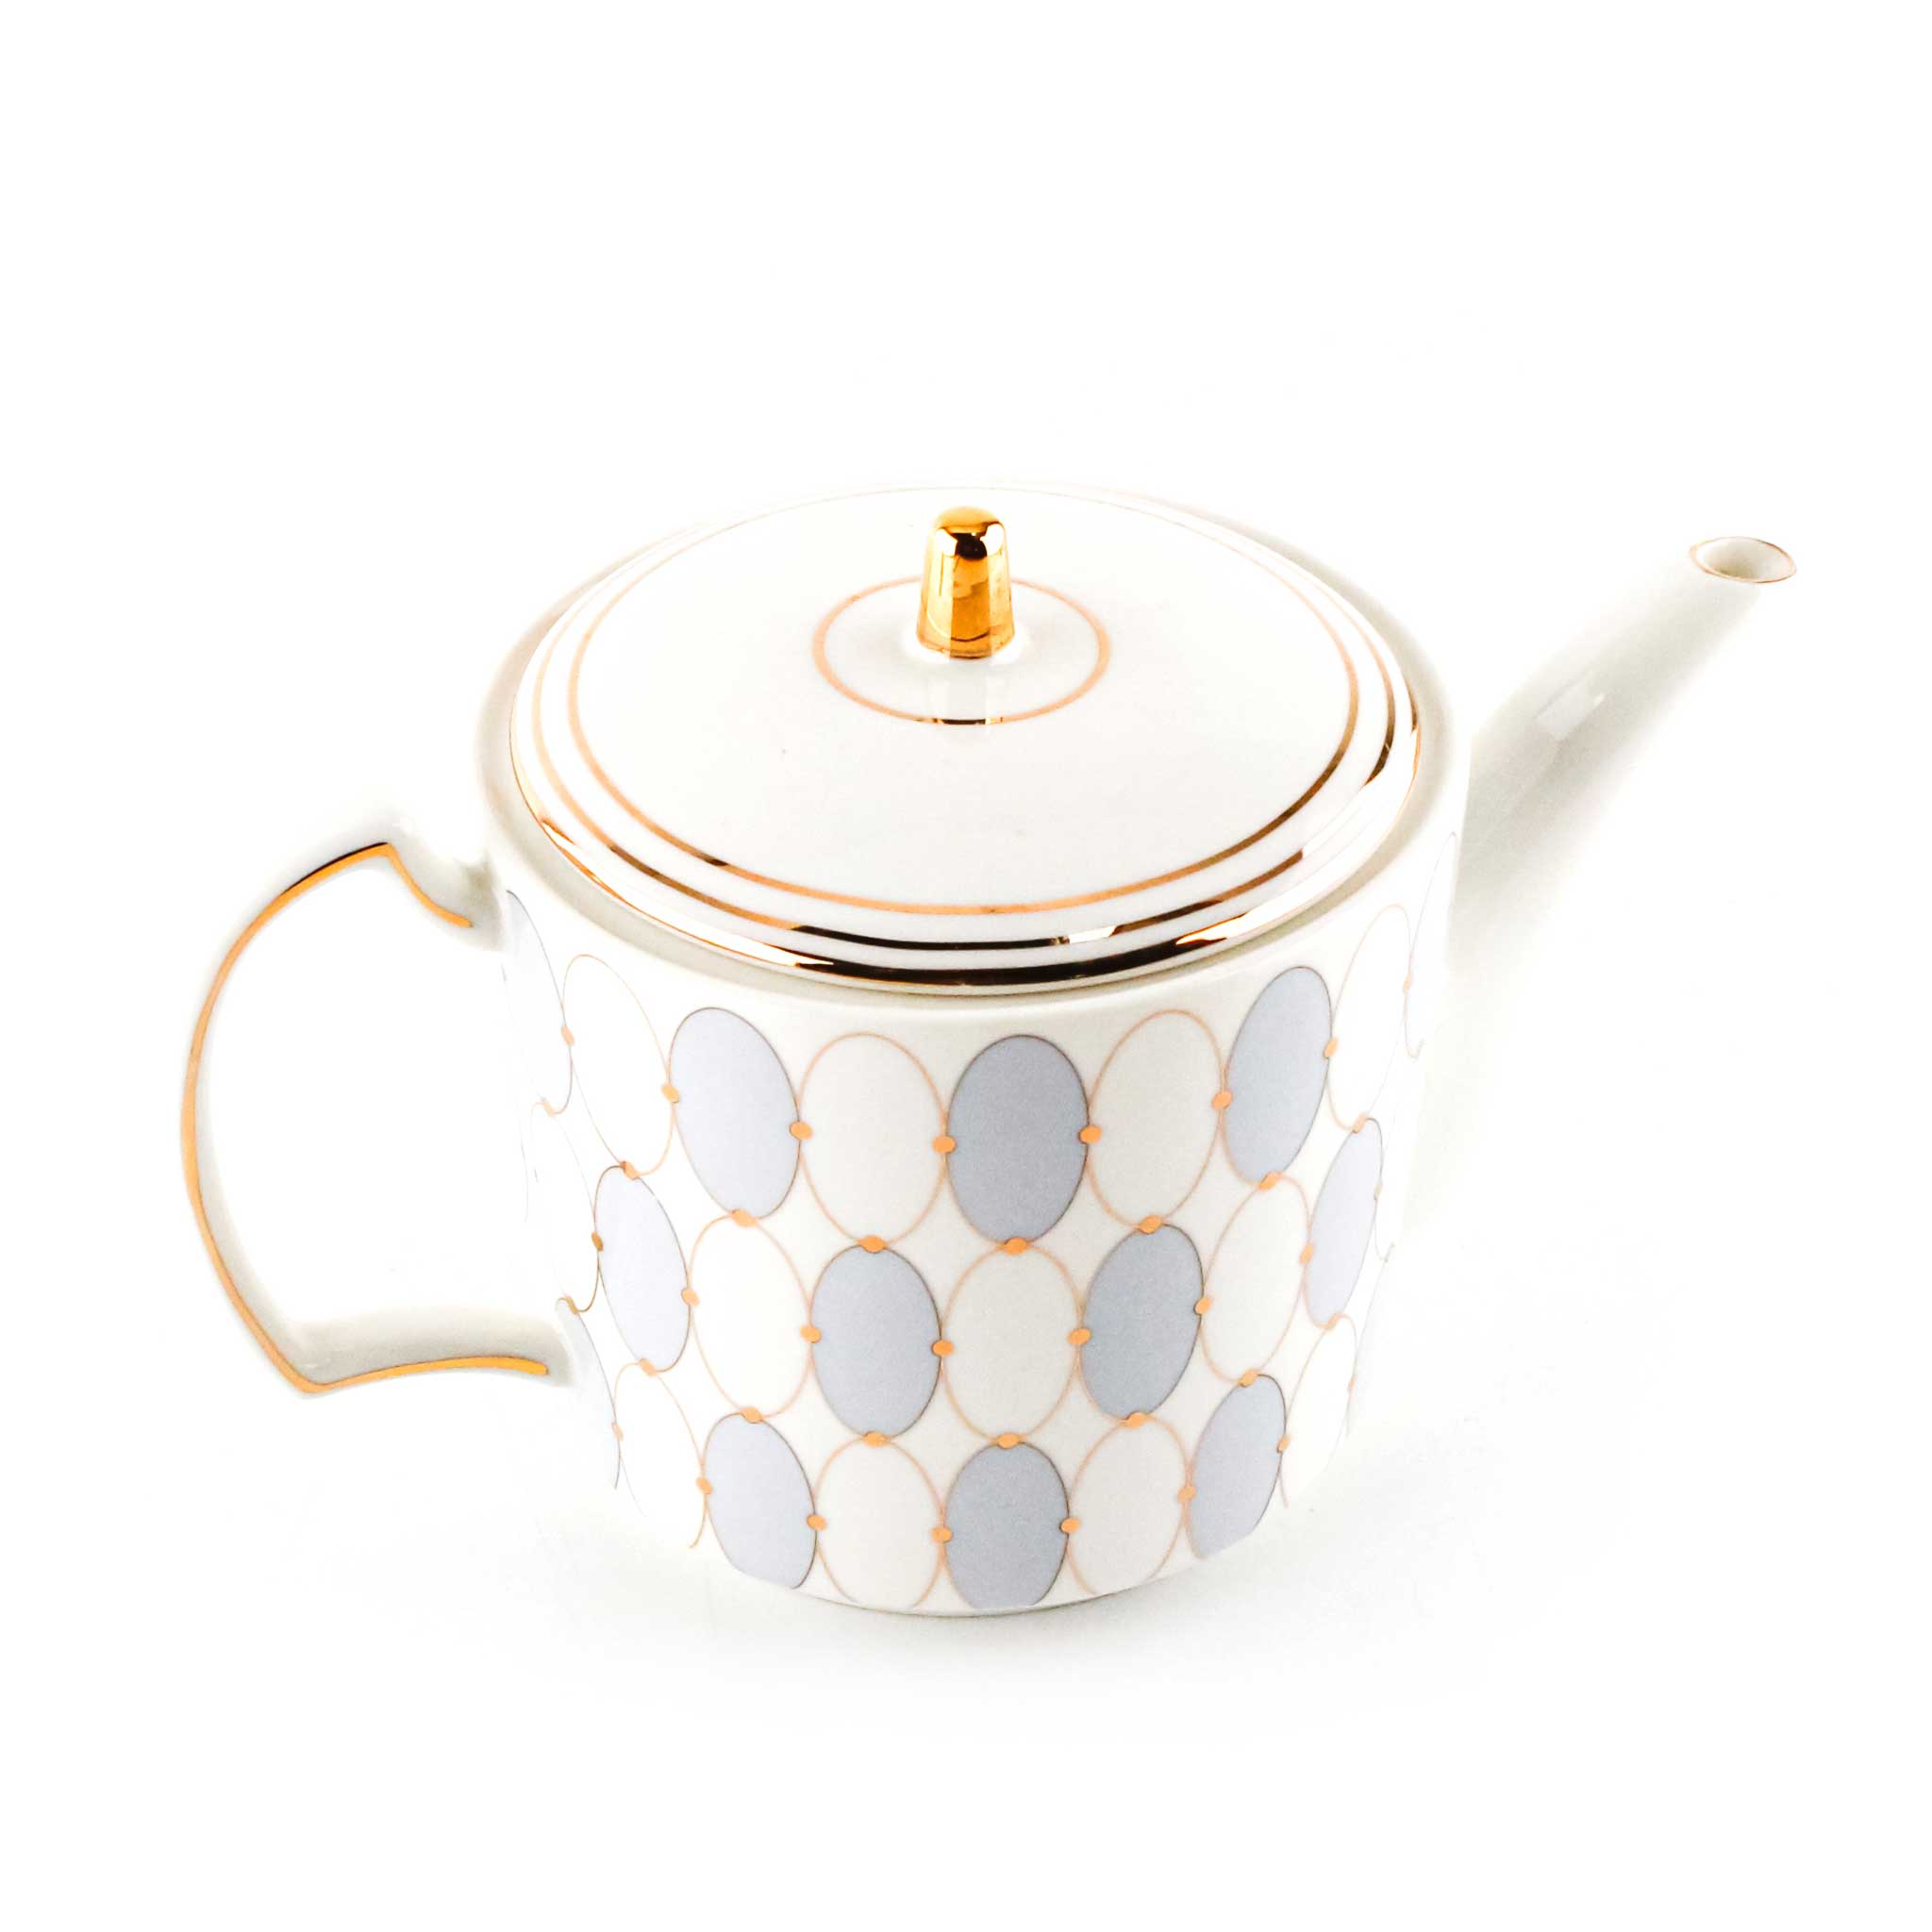 Small ceramic teapot by China Blue